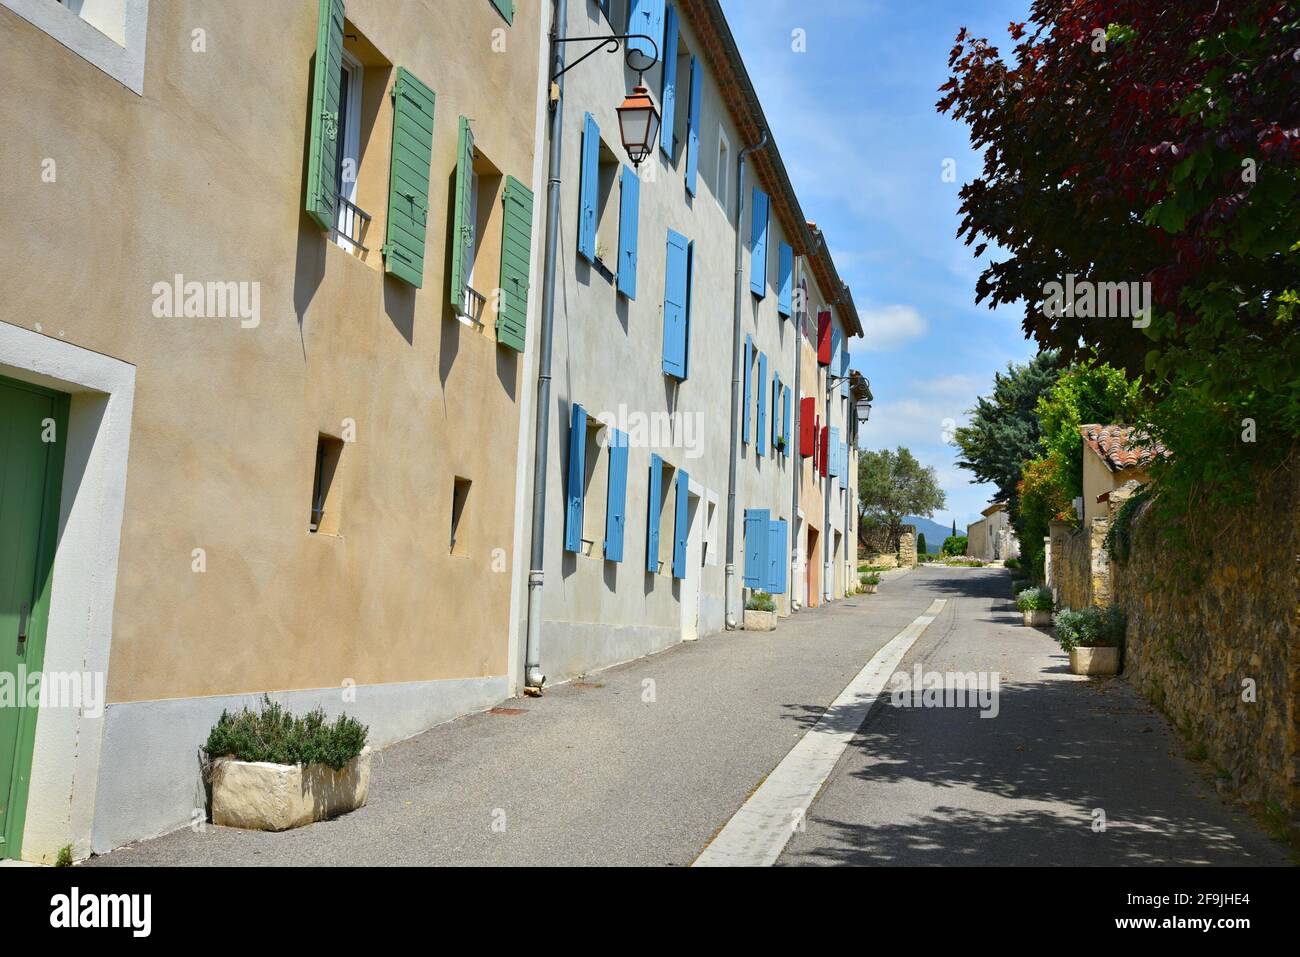 Typical Provençal style architecture in the picturesque village of Lourmarin in Vaucluse, Provence France. Stock Photo